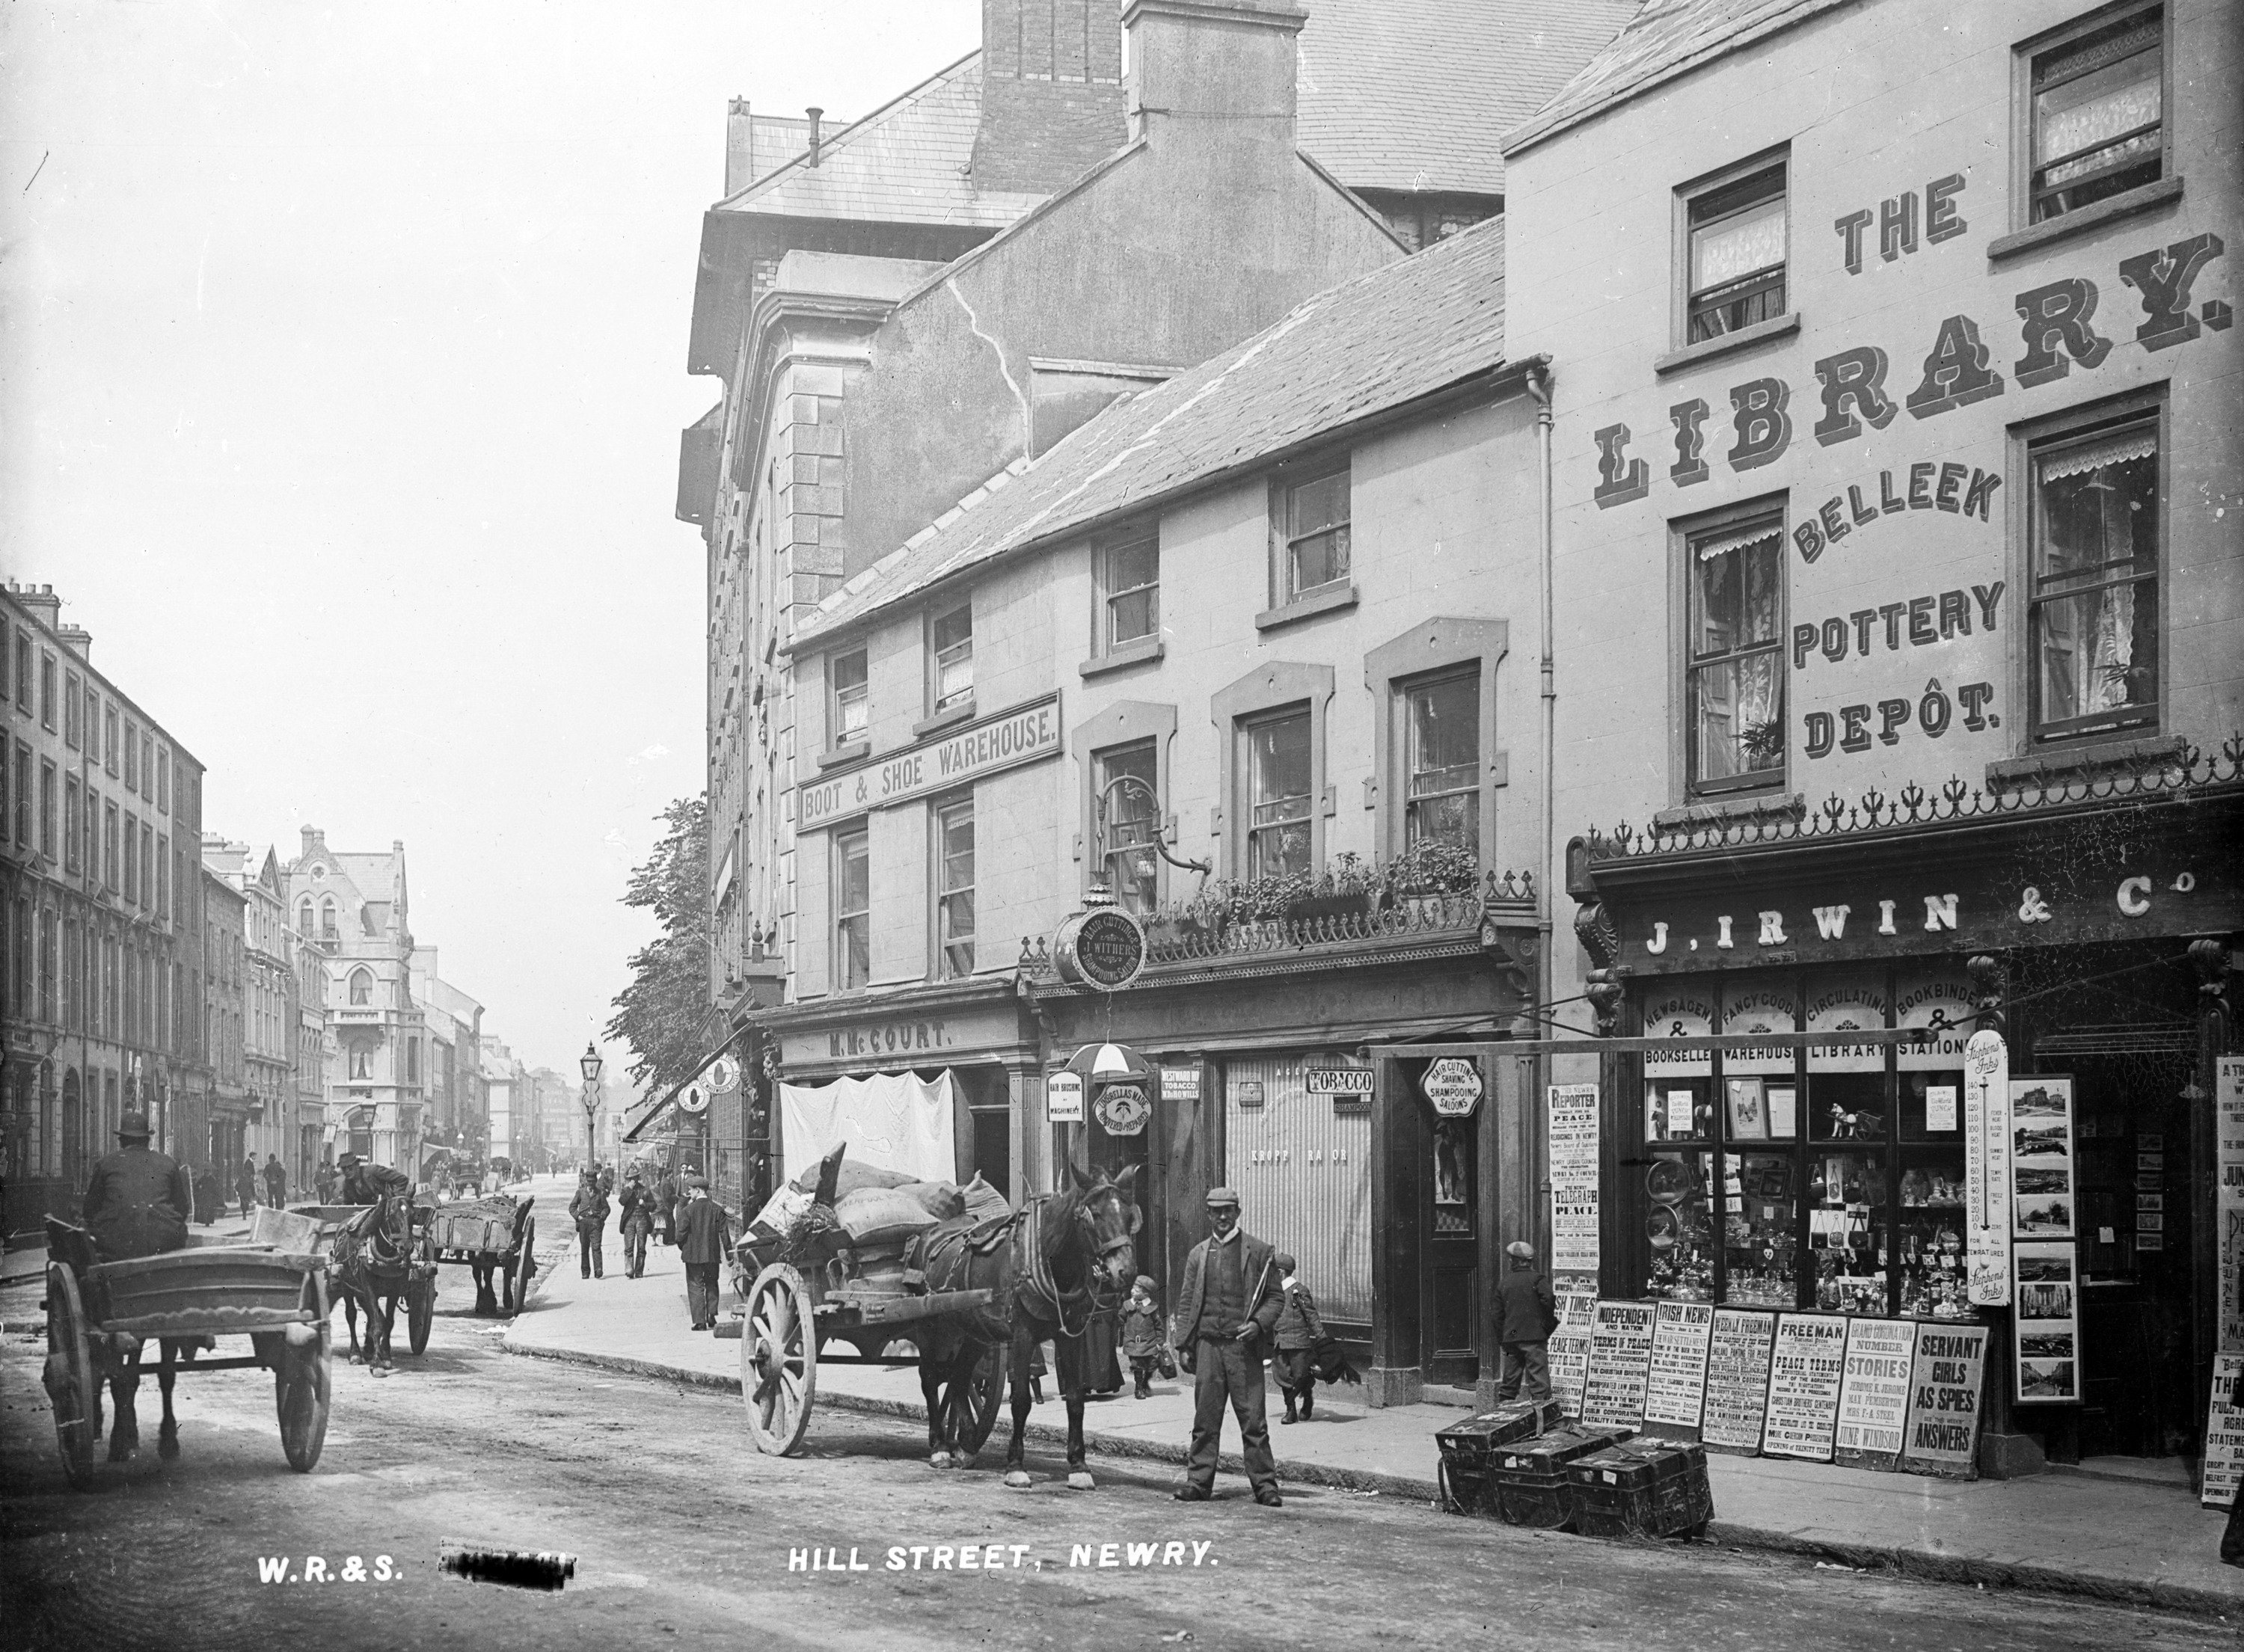 Hill Street, Newry, County Down